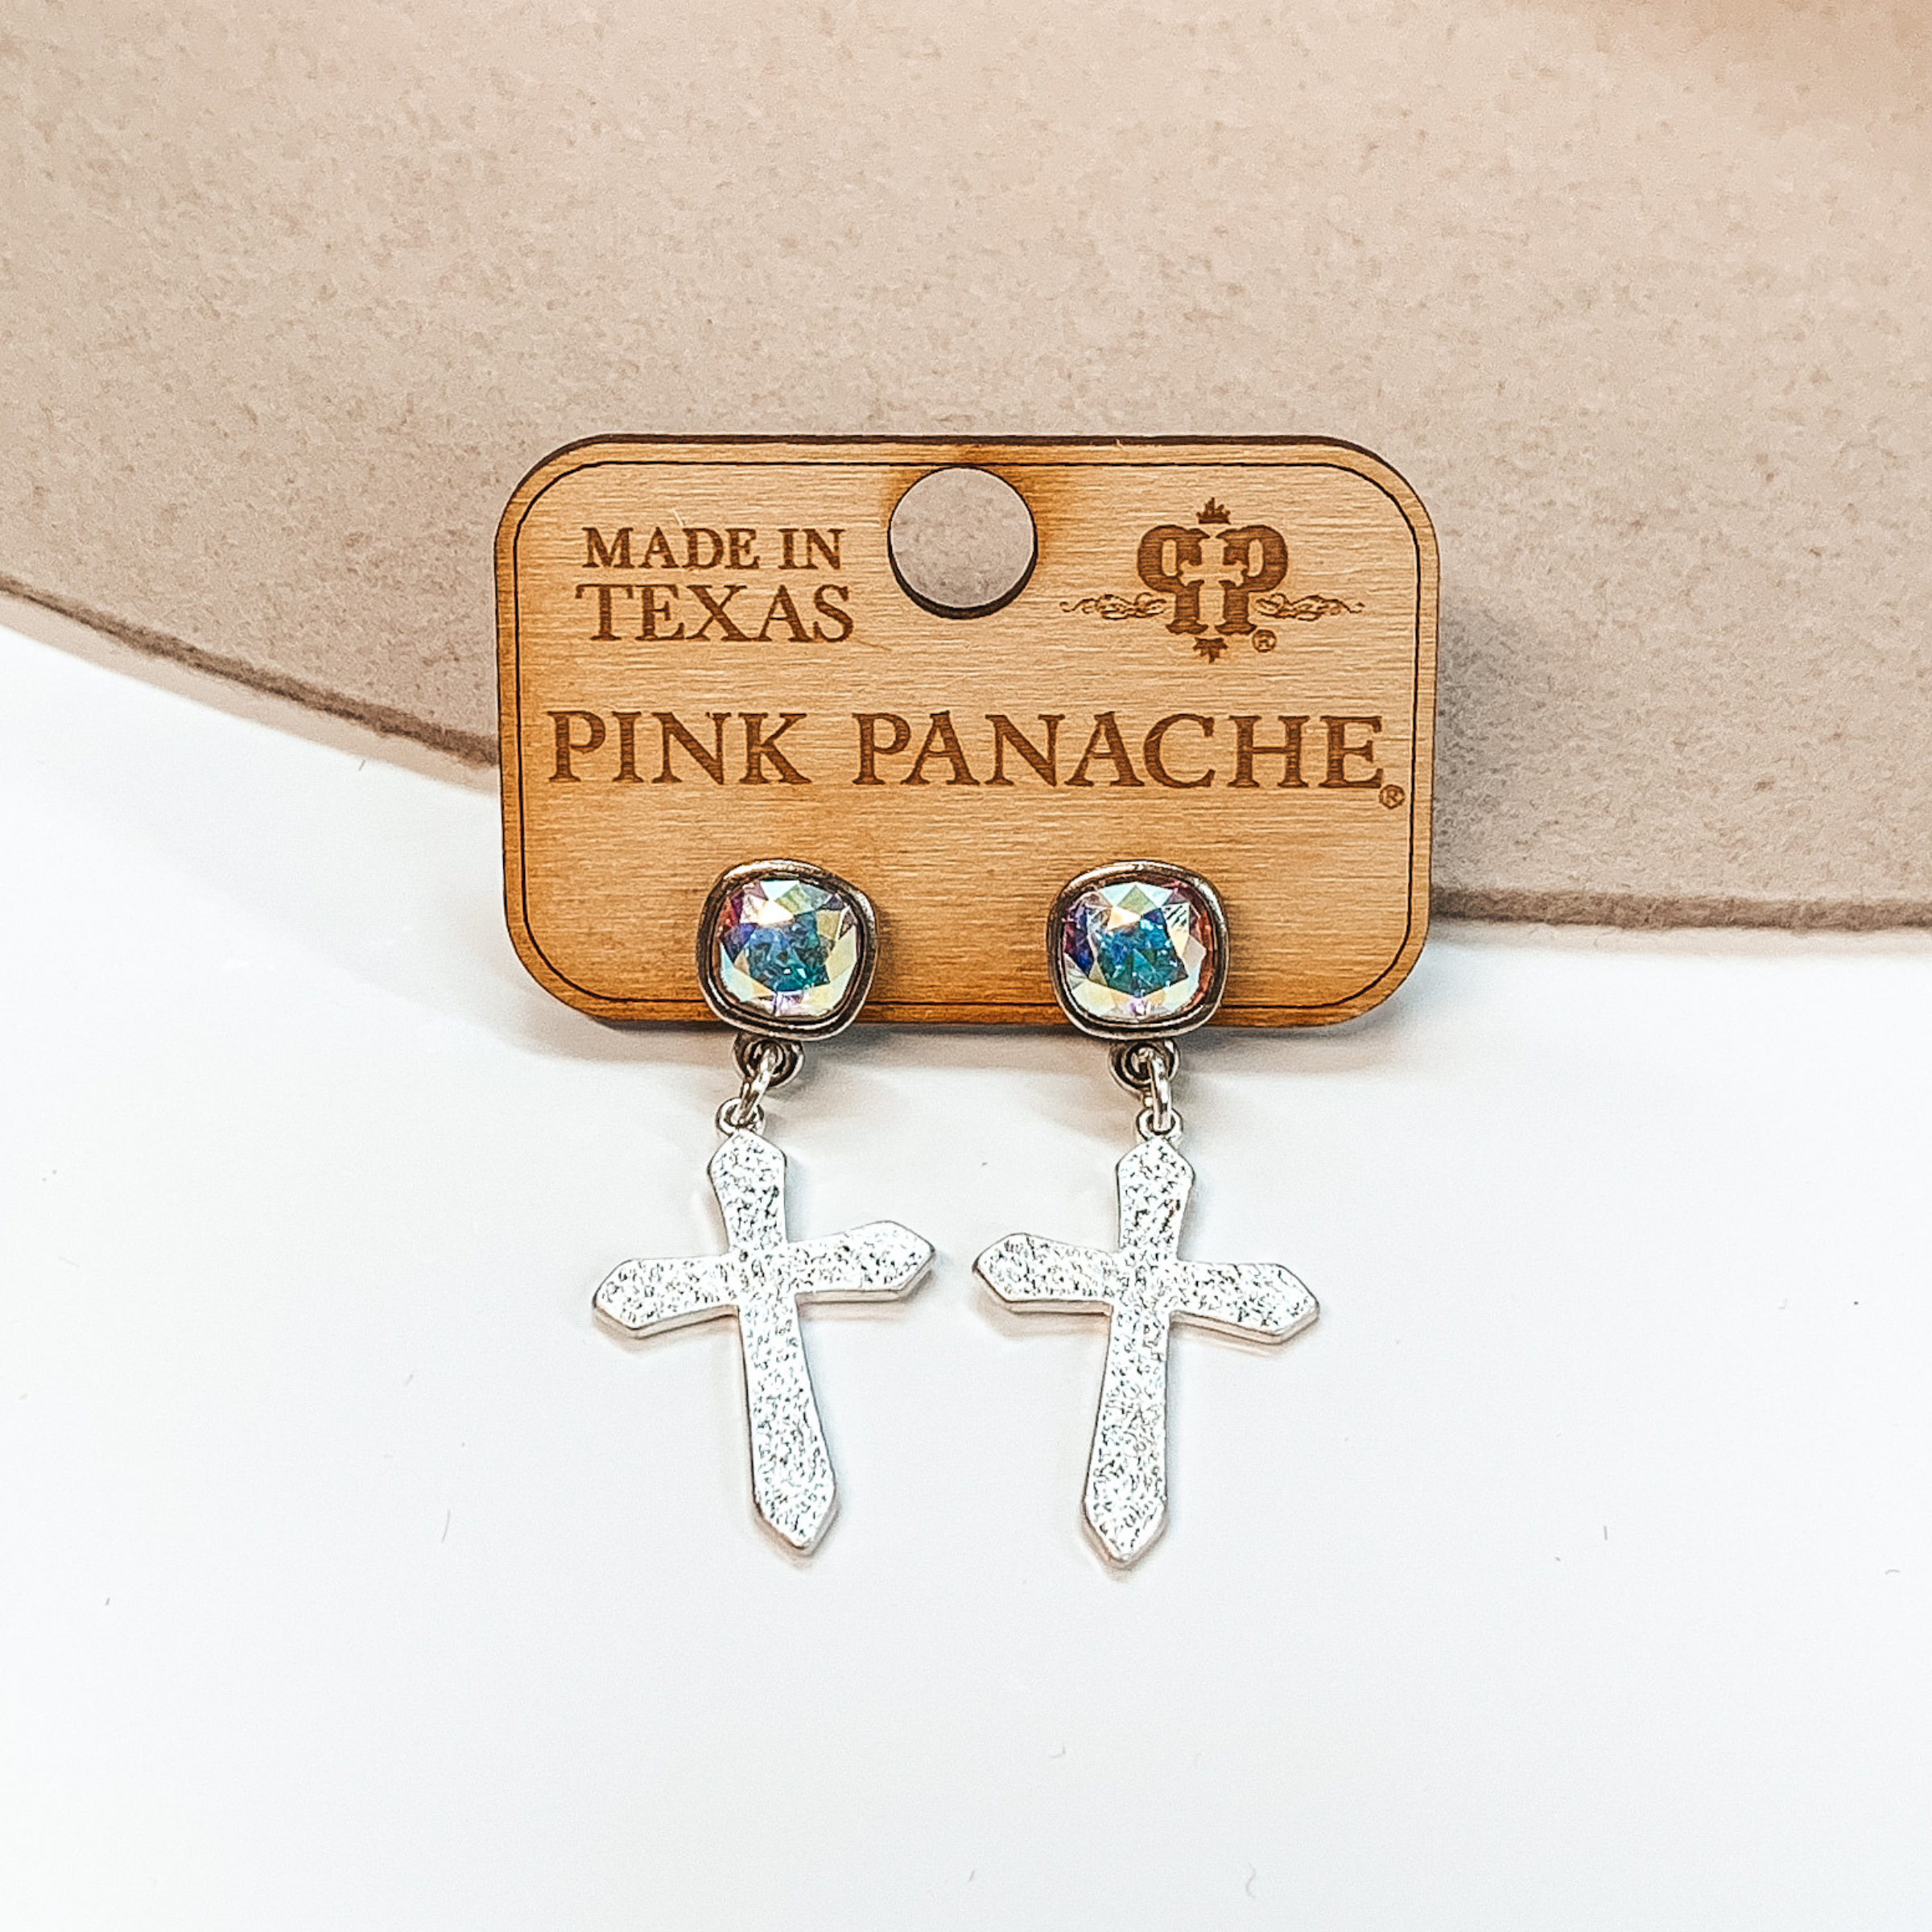 Ab cushion cut crystal stud earrings with a hanging silver, textured cross pendant in silver. These earrings are pictured on a white and tan background. 